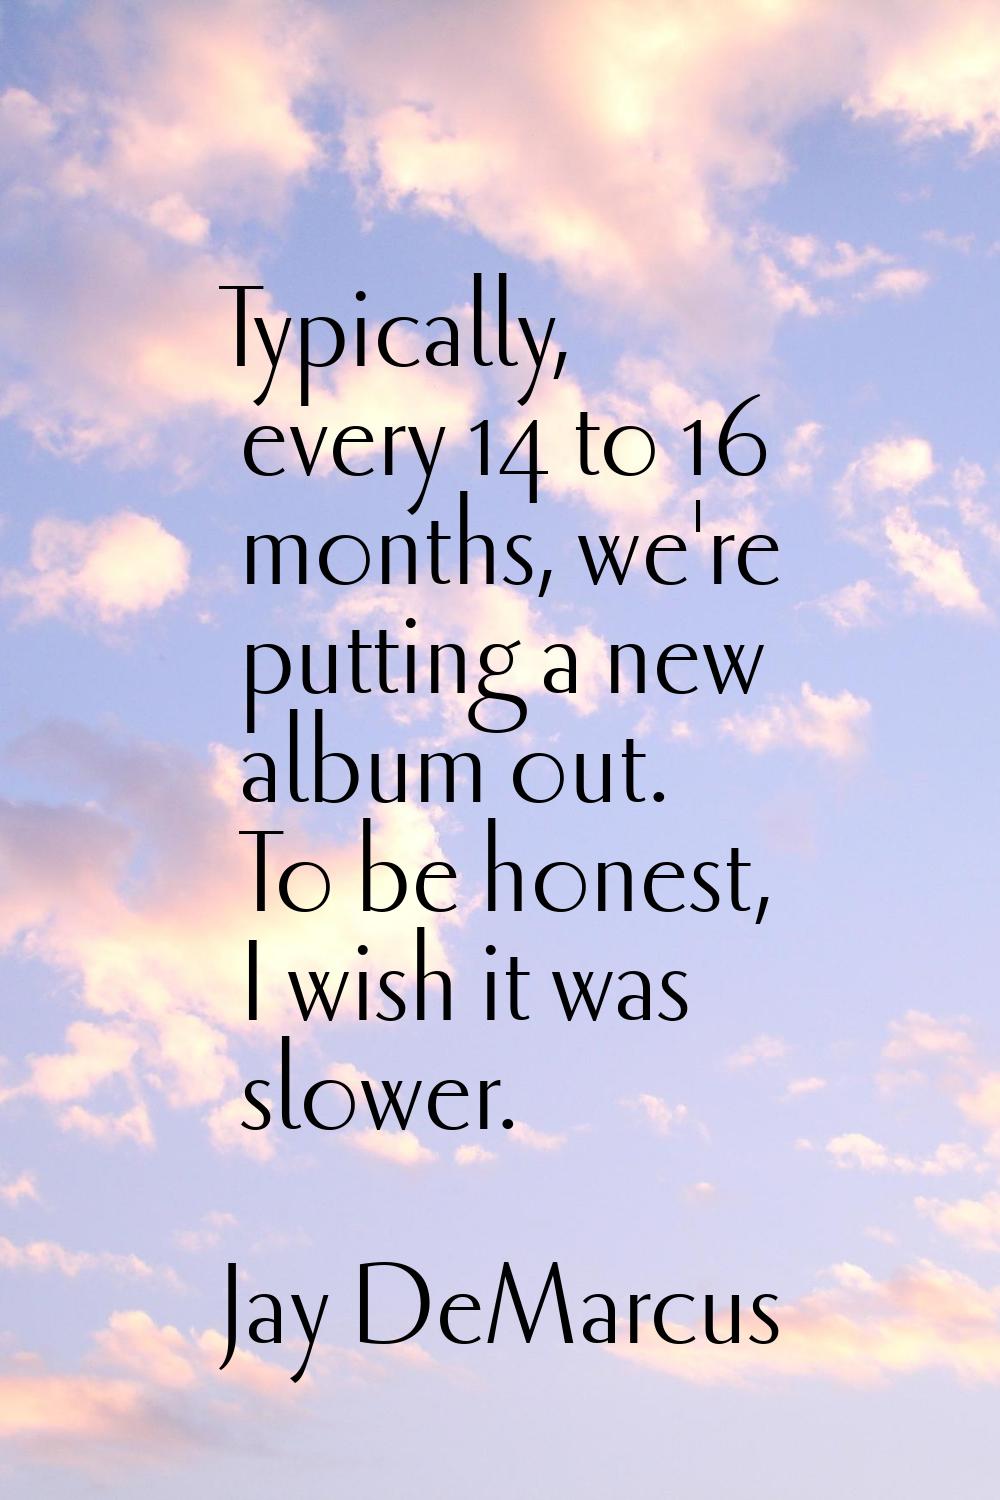 Typically, every 14 to 16 months, we're putting a new album out. To be honest, I wish it was slower